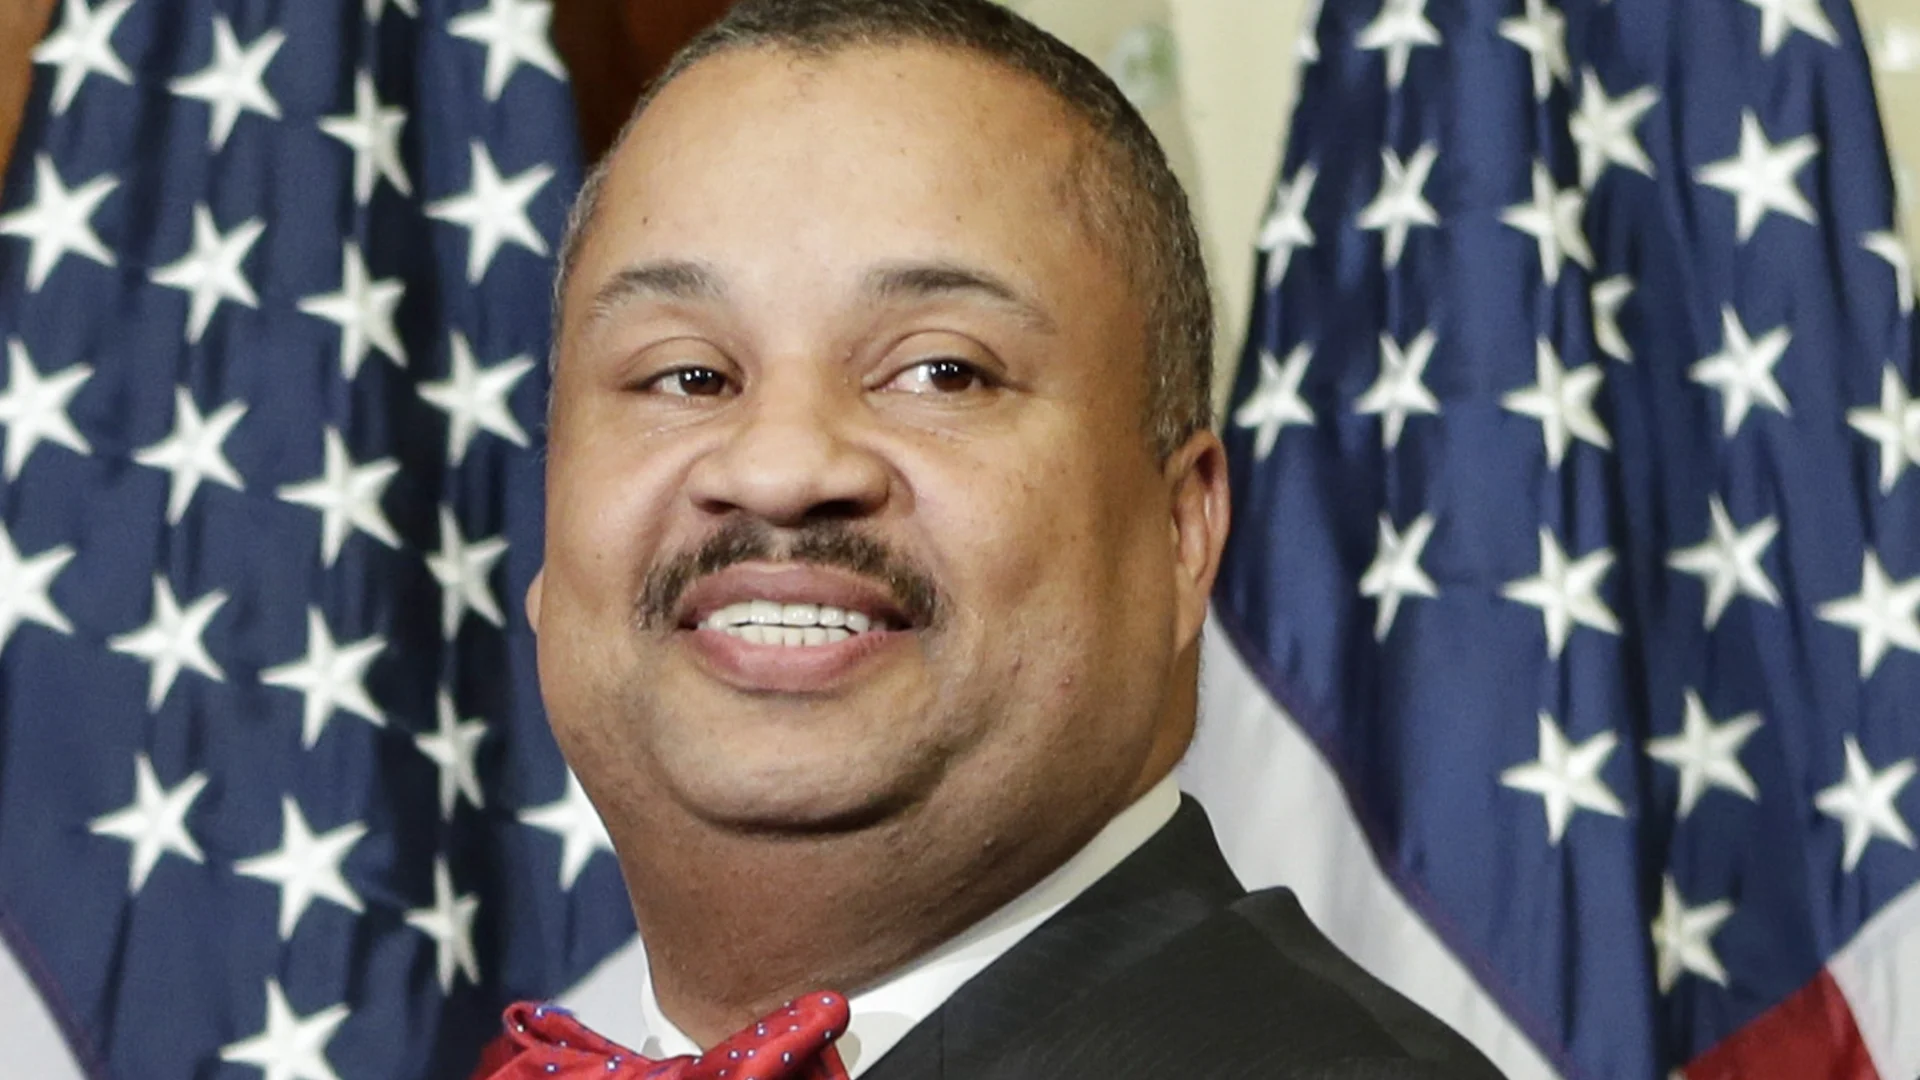 Longtime US Rep. Donald Payne Jr. dies at 65 after suffering heart attack